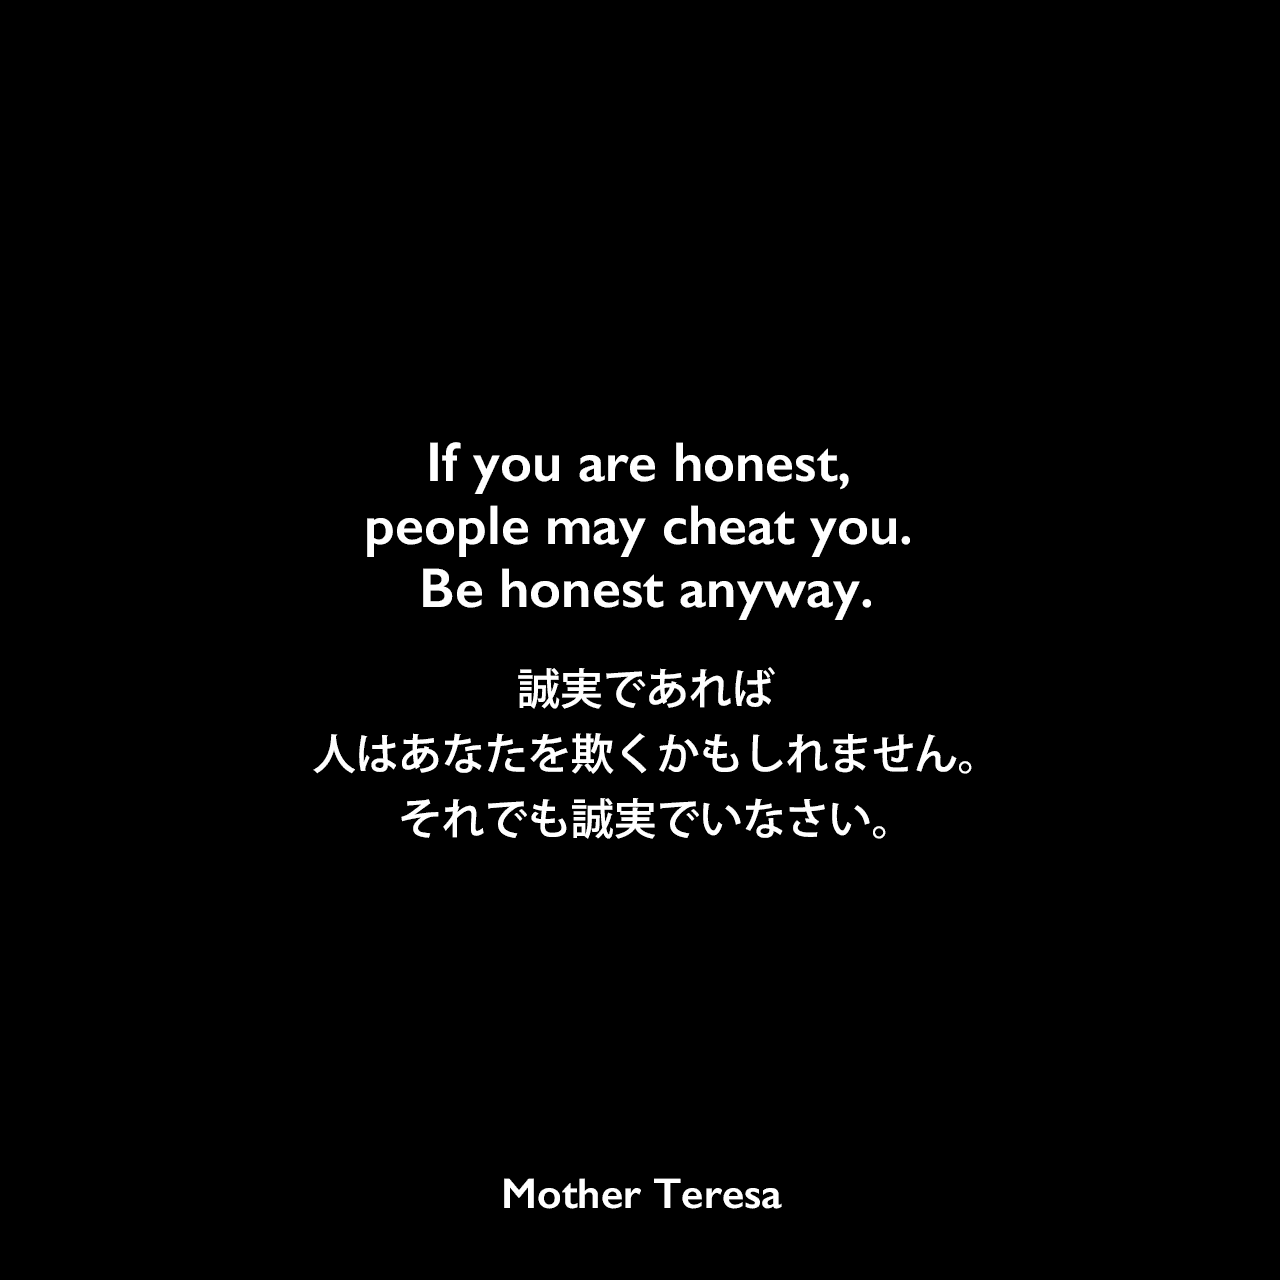 If you are honest, people may cheat you. Be honest anyway.誠実であれば、人はあなたを欺くかもしれません。それでも誠実でいなさい。